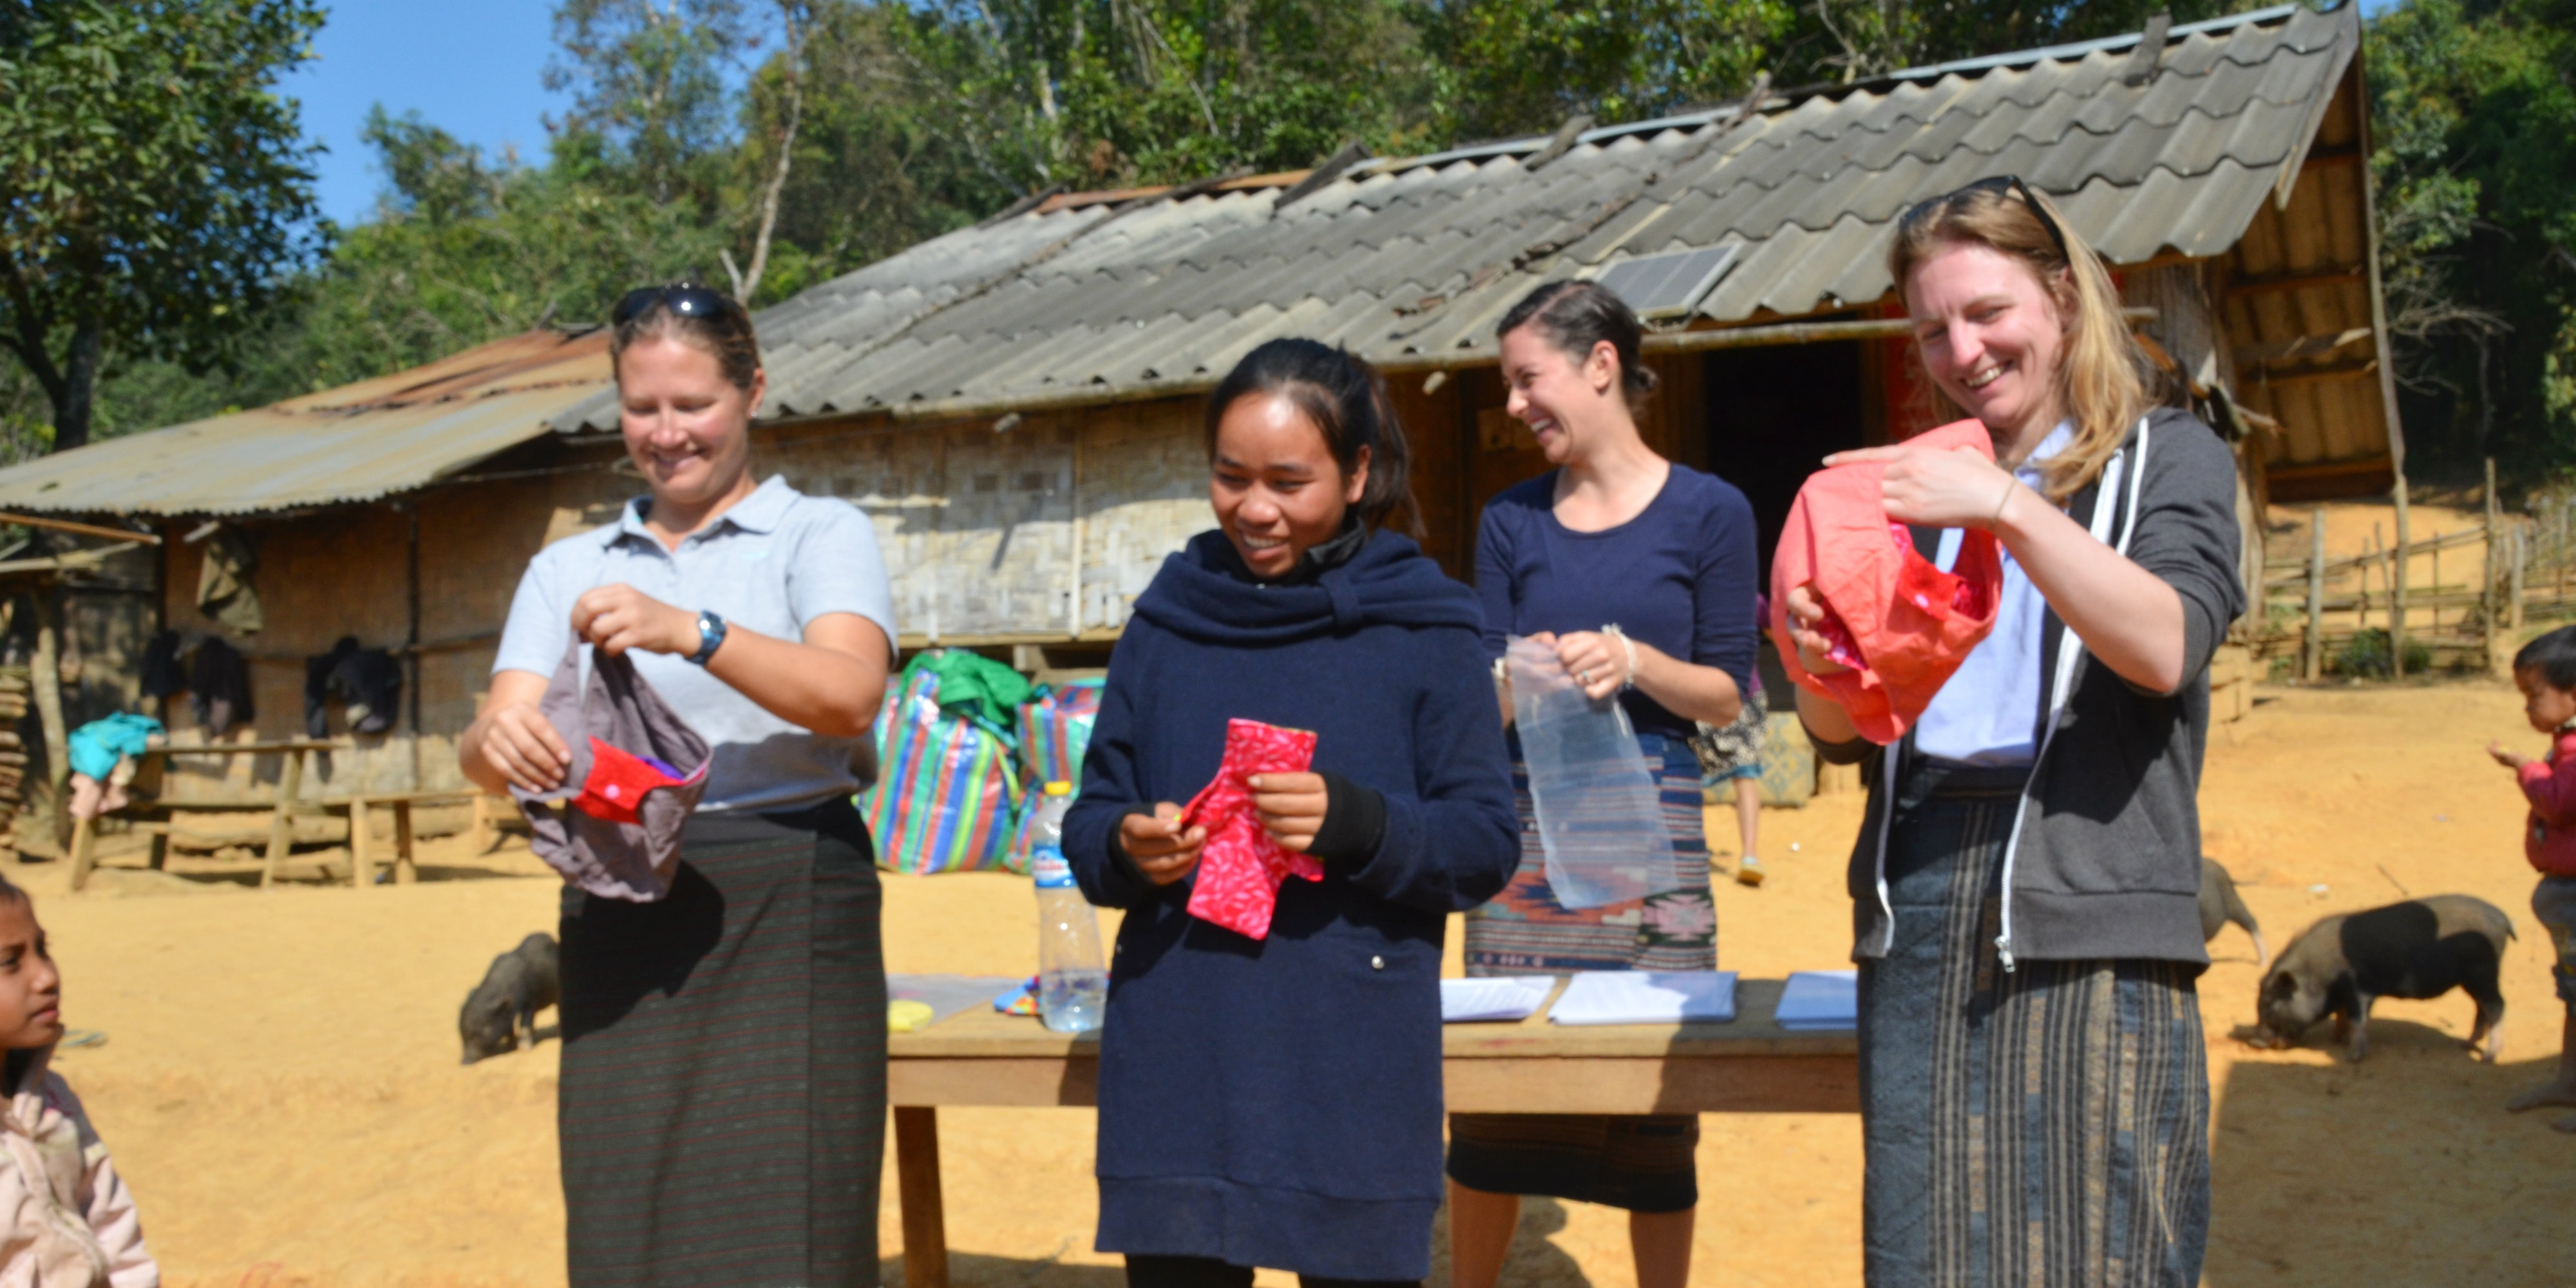 GVI staff demonstrate how the Days for Girls menstrual health kits are used.